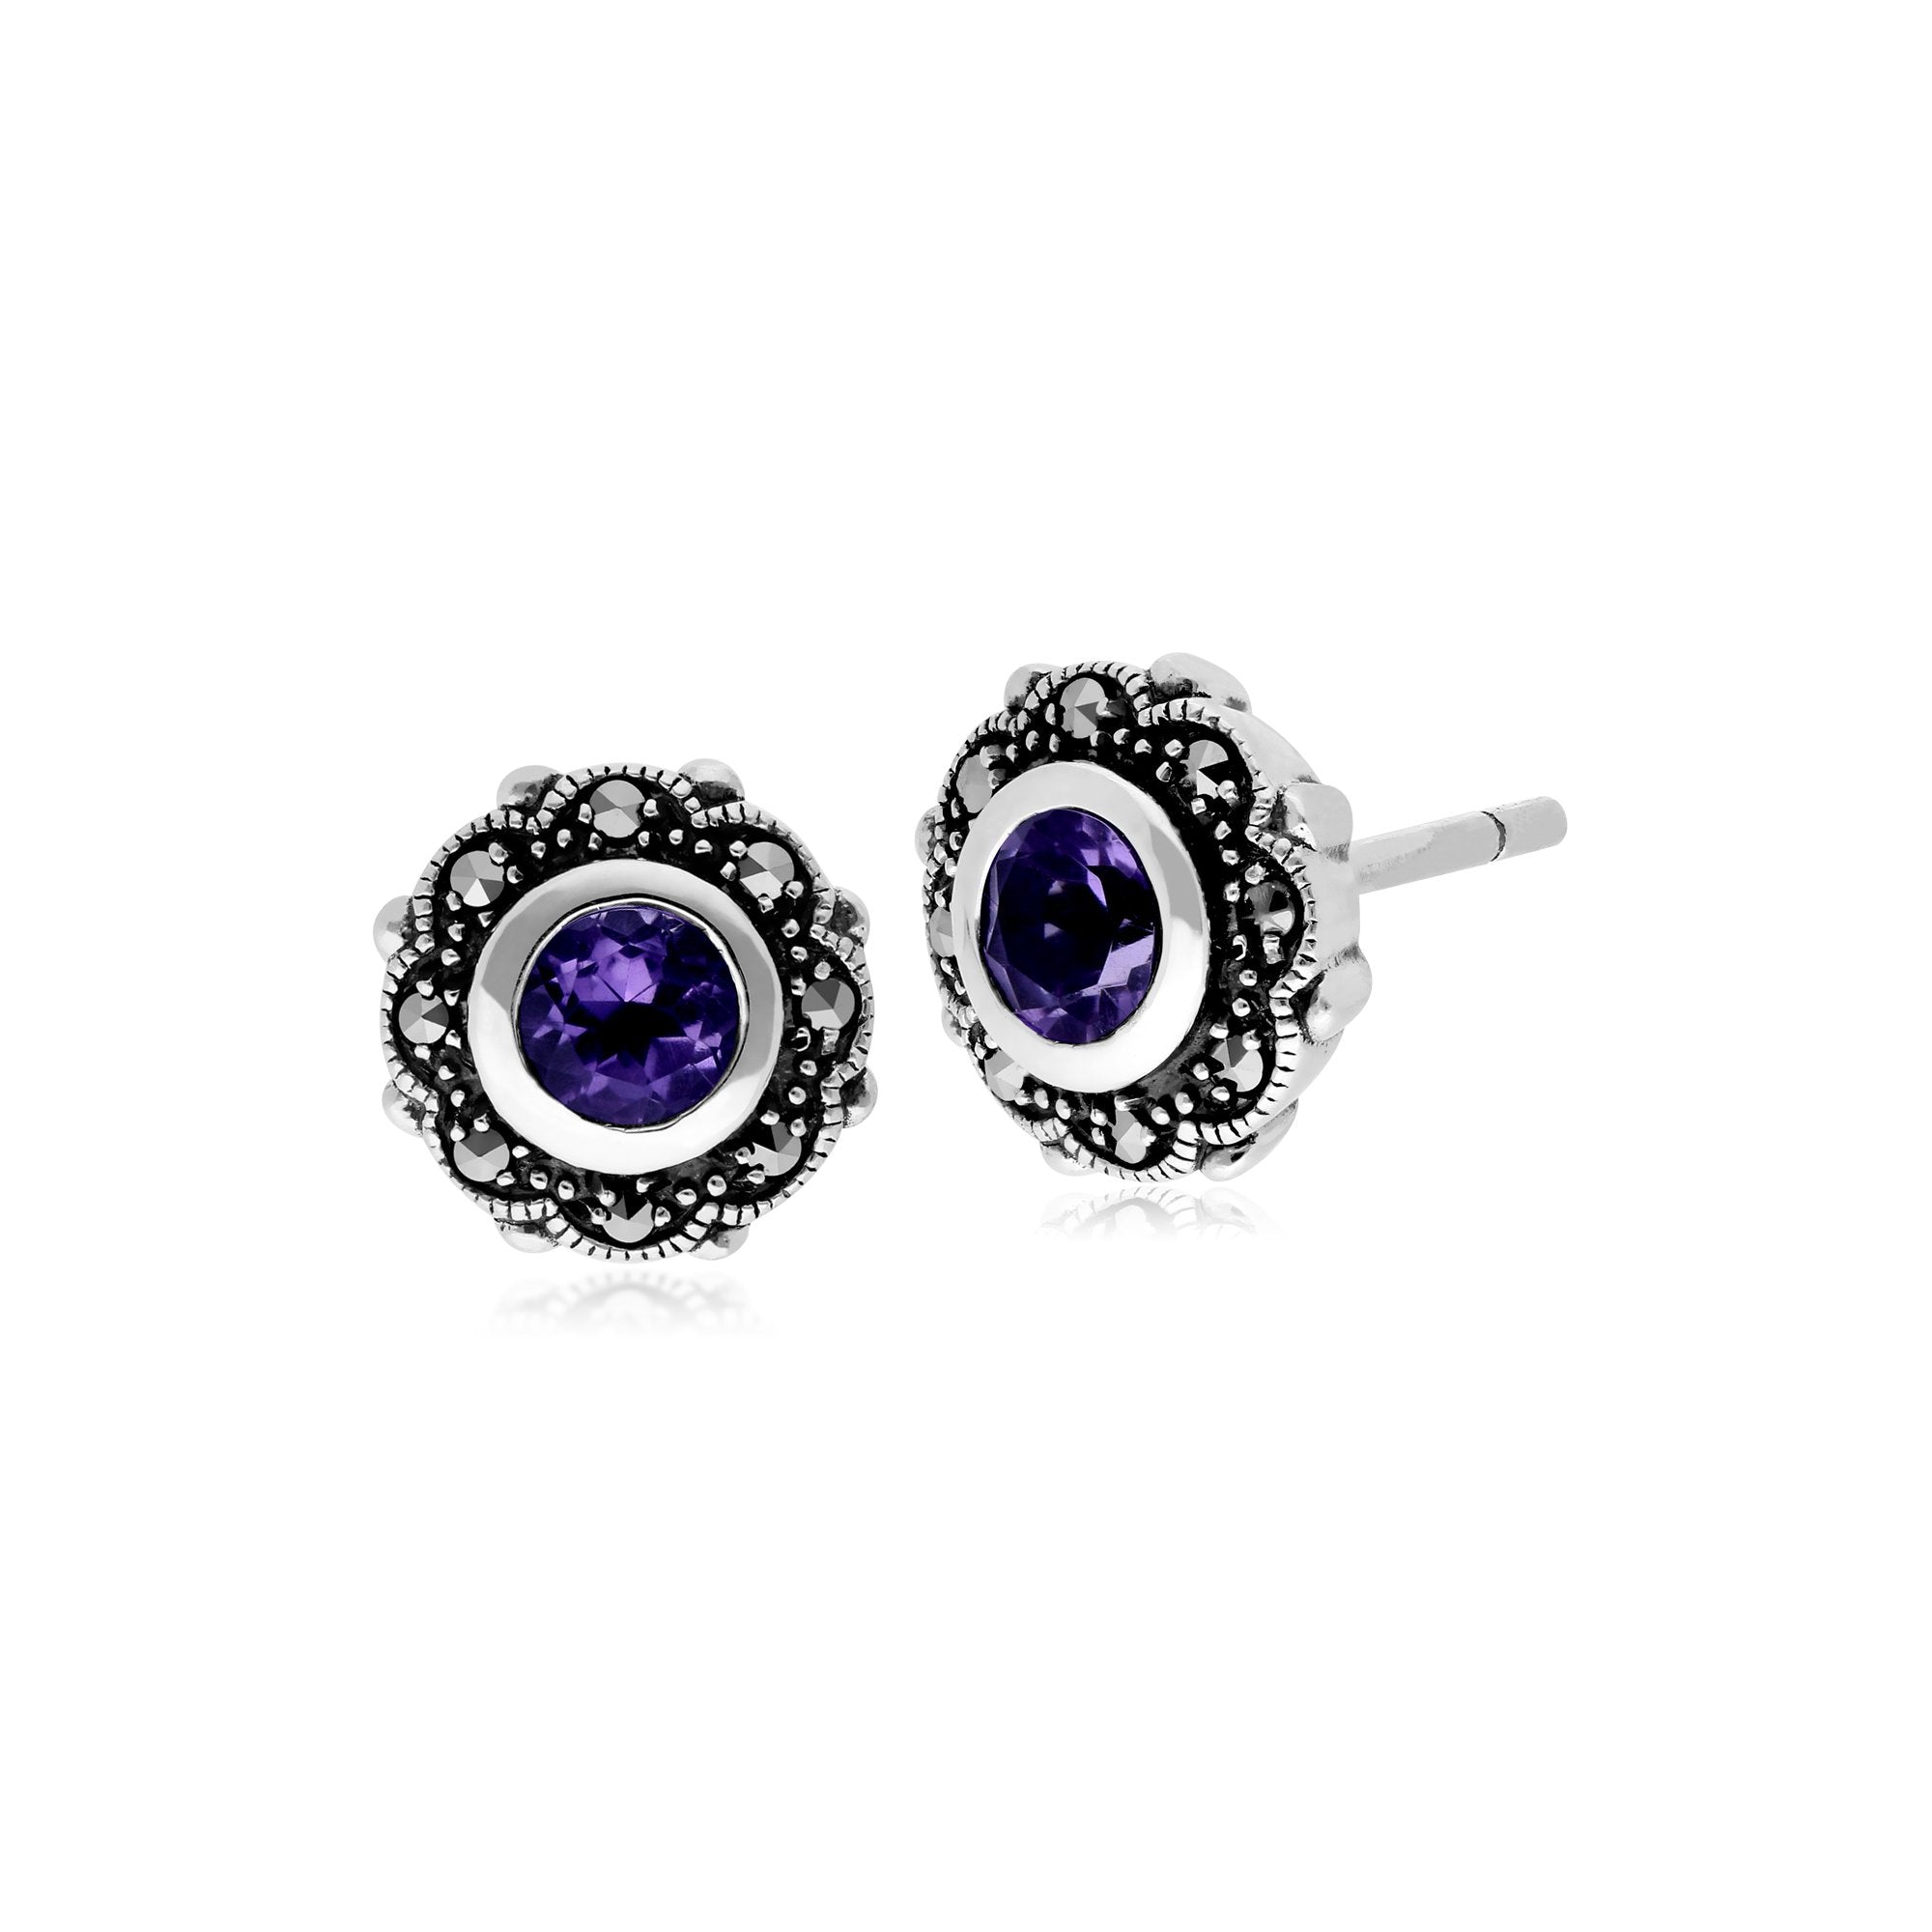 Art Nouveau Style Round Amethyst & Marcasite Floral Stud Earrings in 925 Sterling Silver